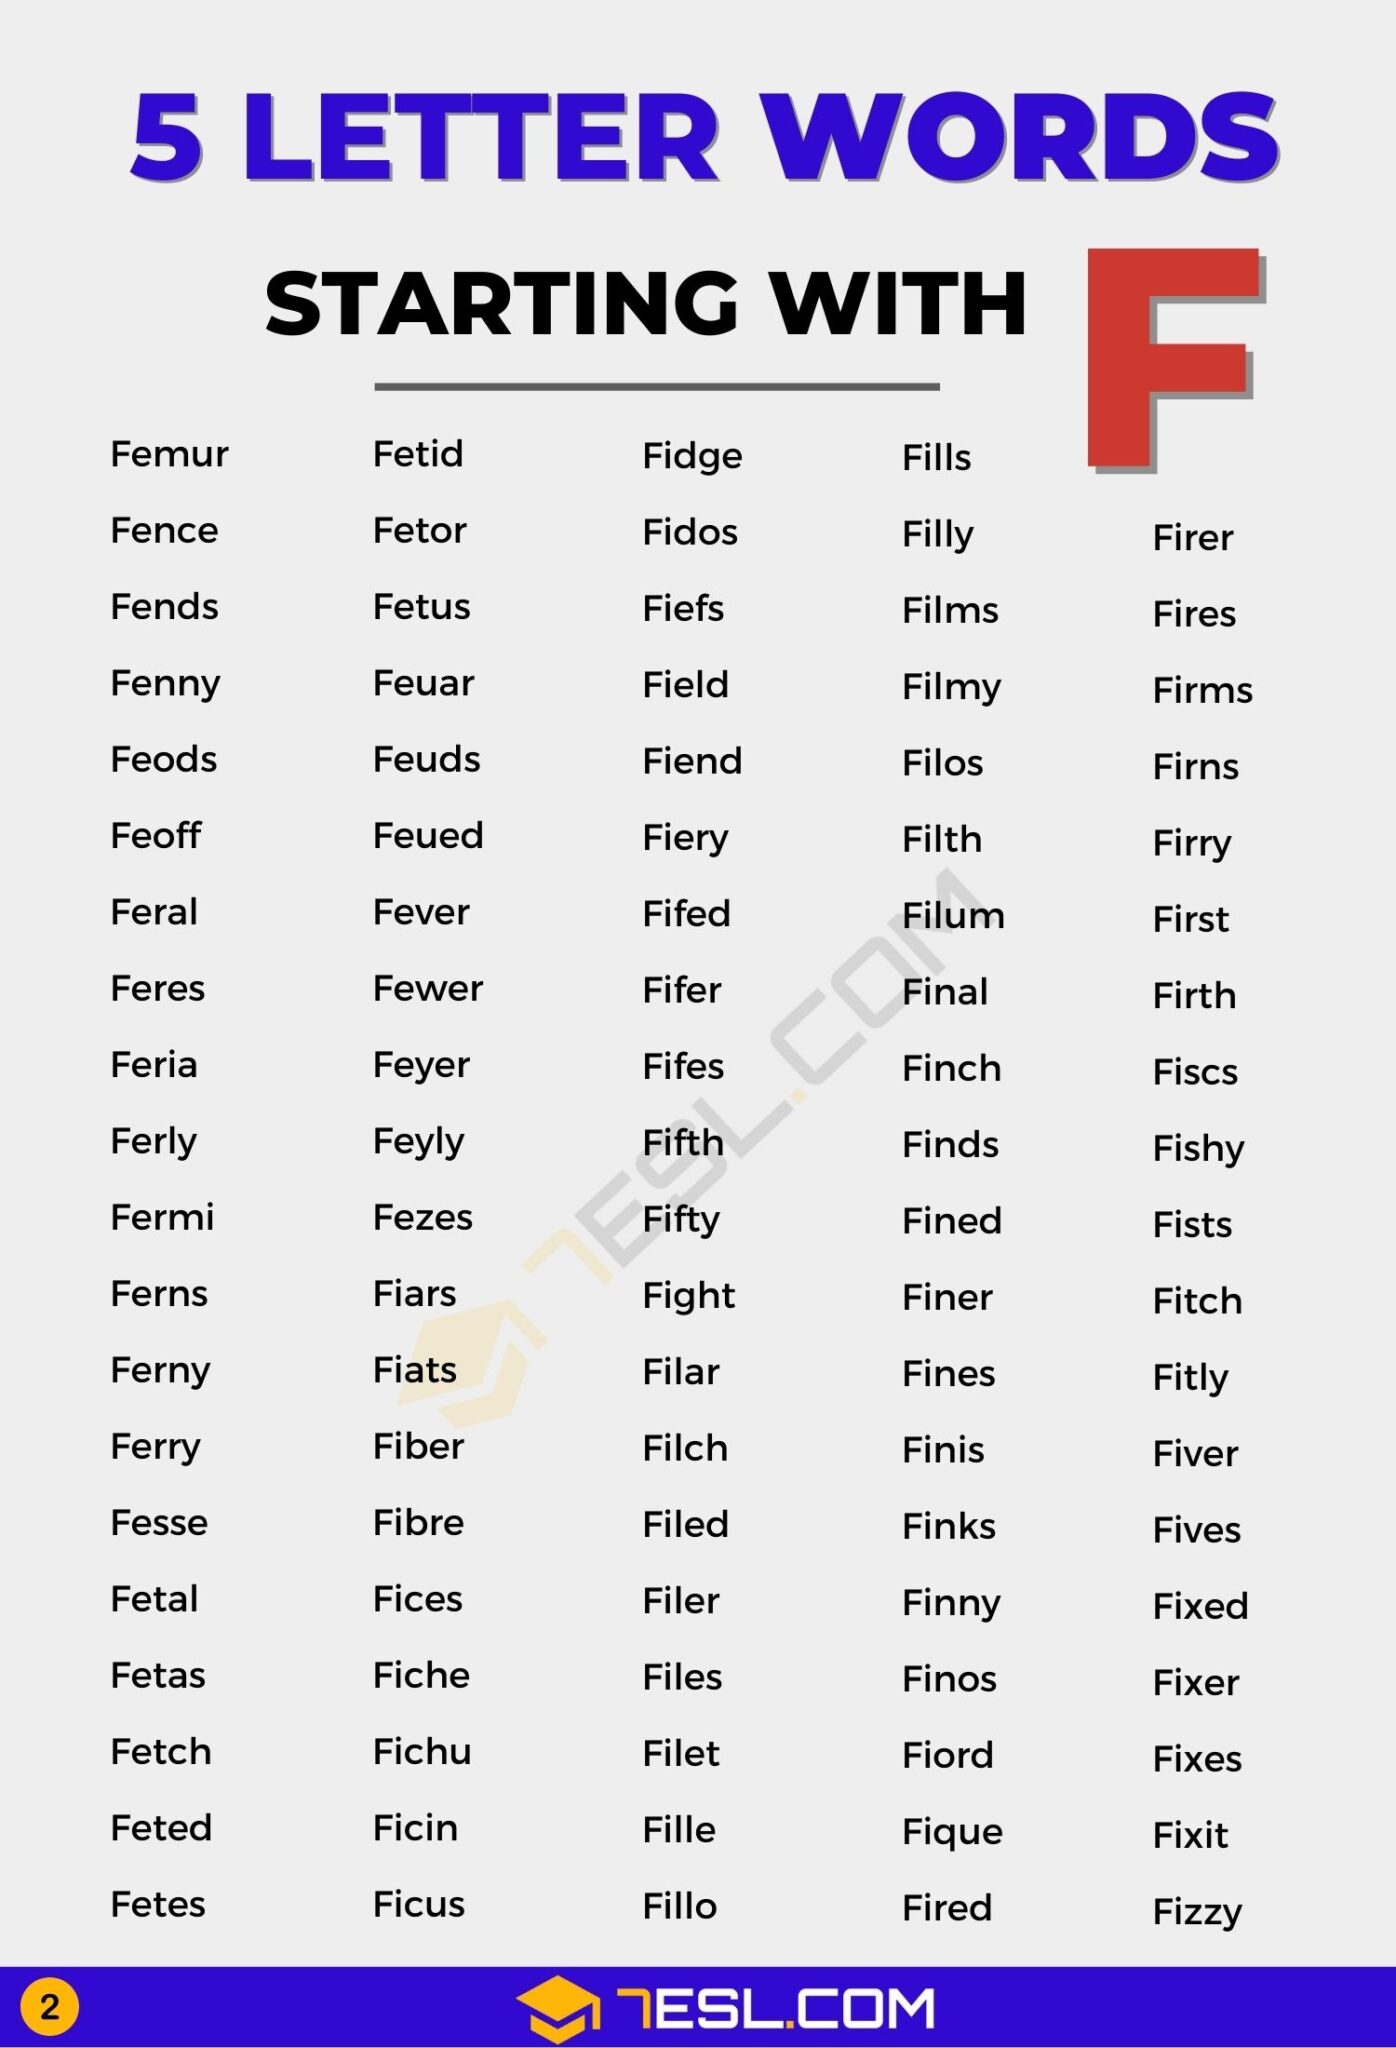 5 letter words starting with f